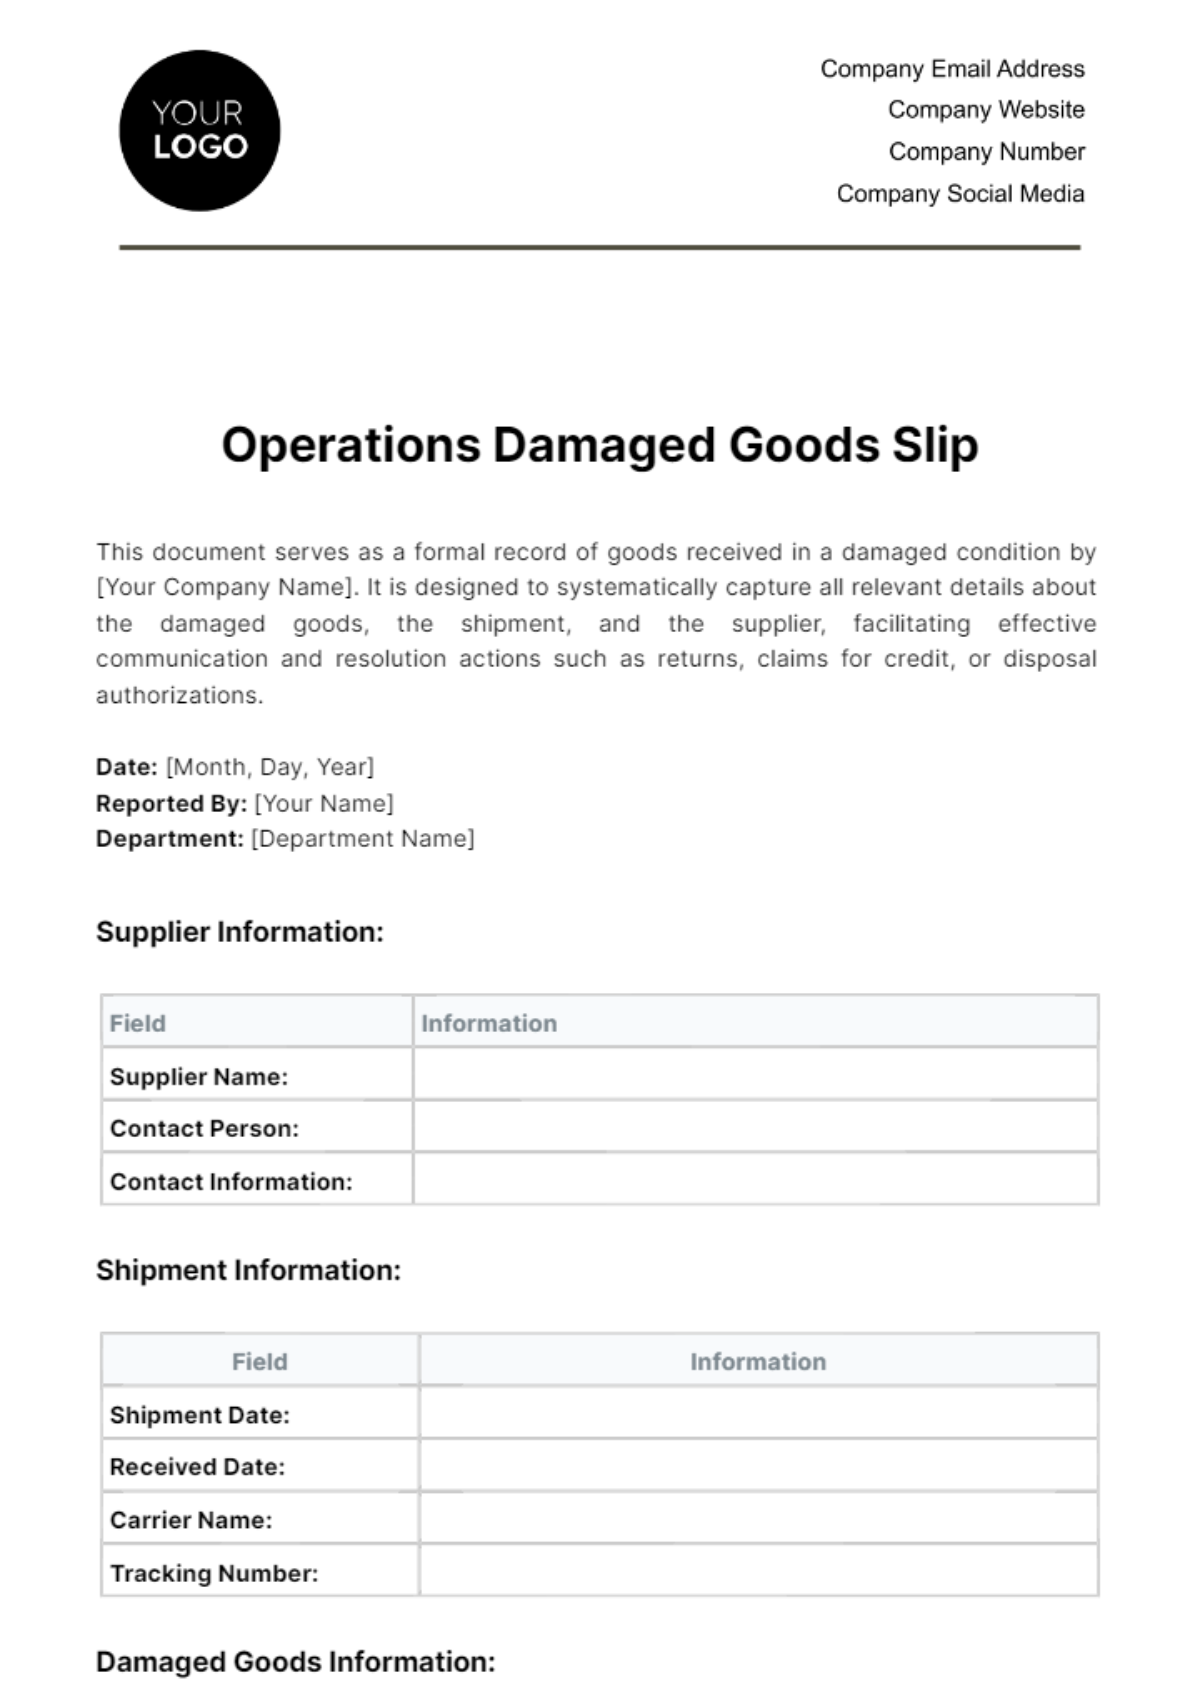 Free Operations Damaged Goods Slip Template